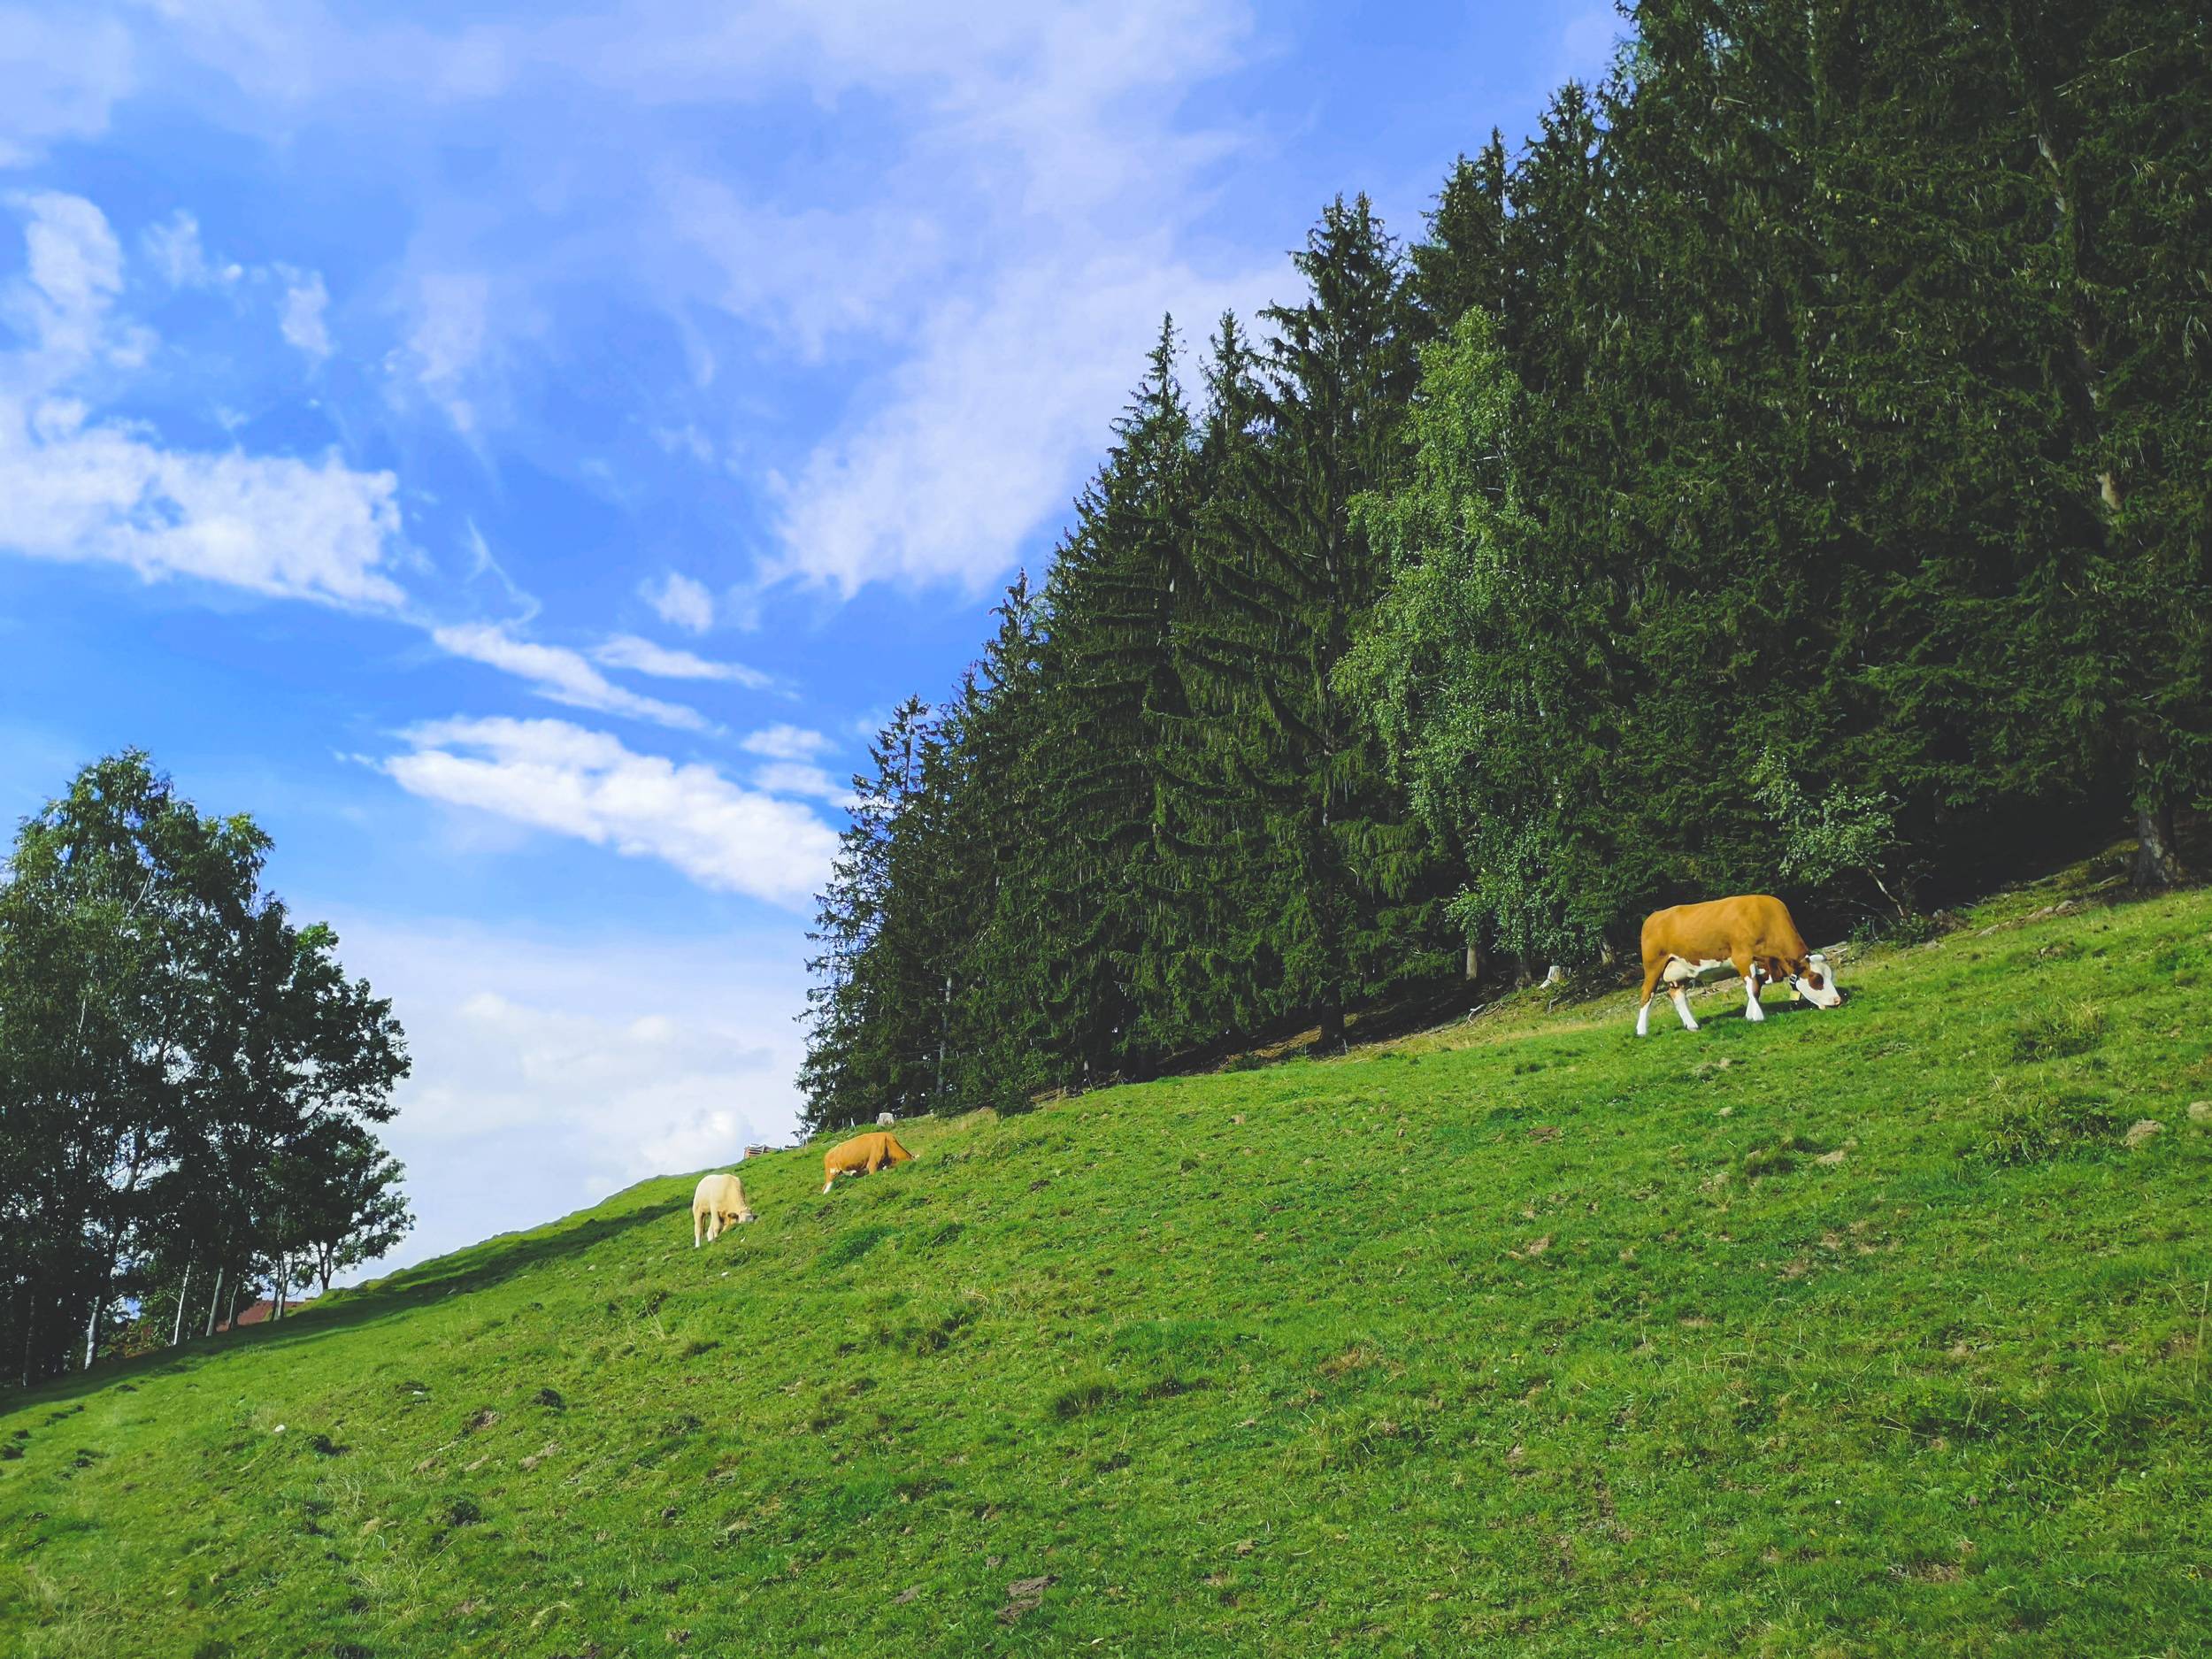 Cows eating grass in Styria, Austria